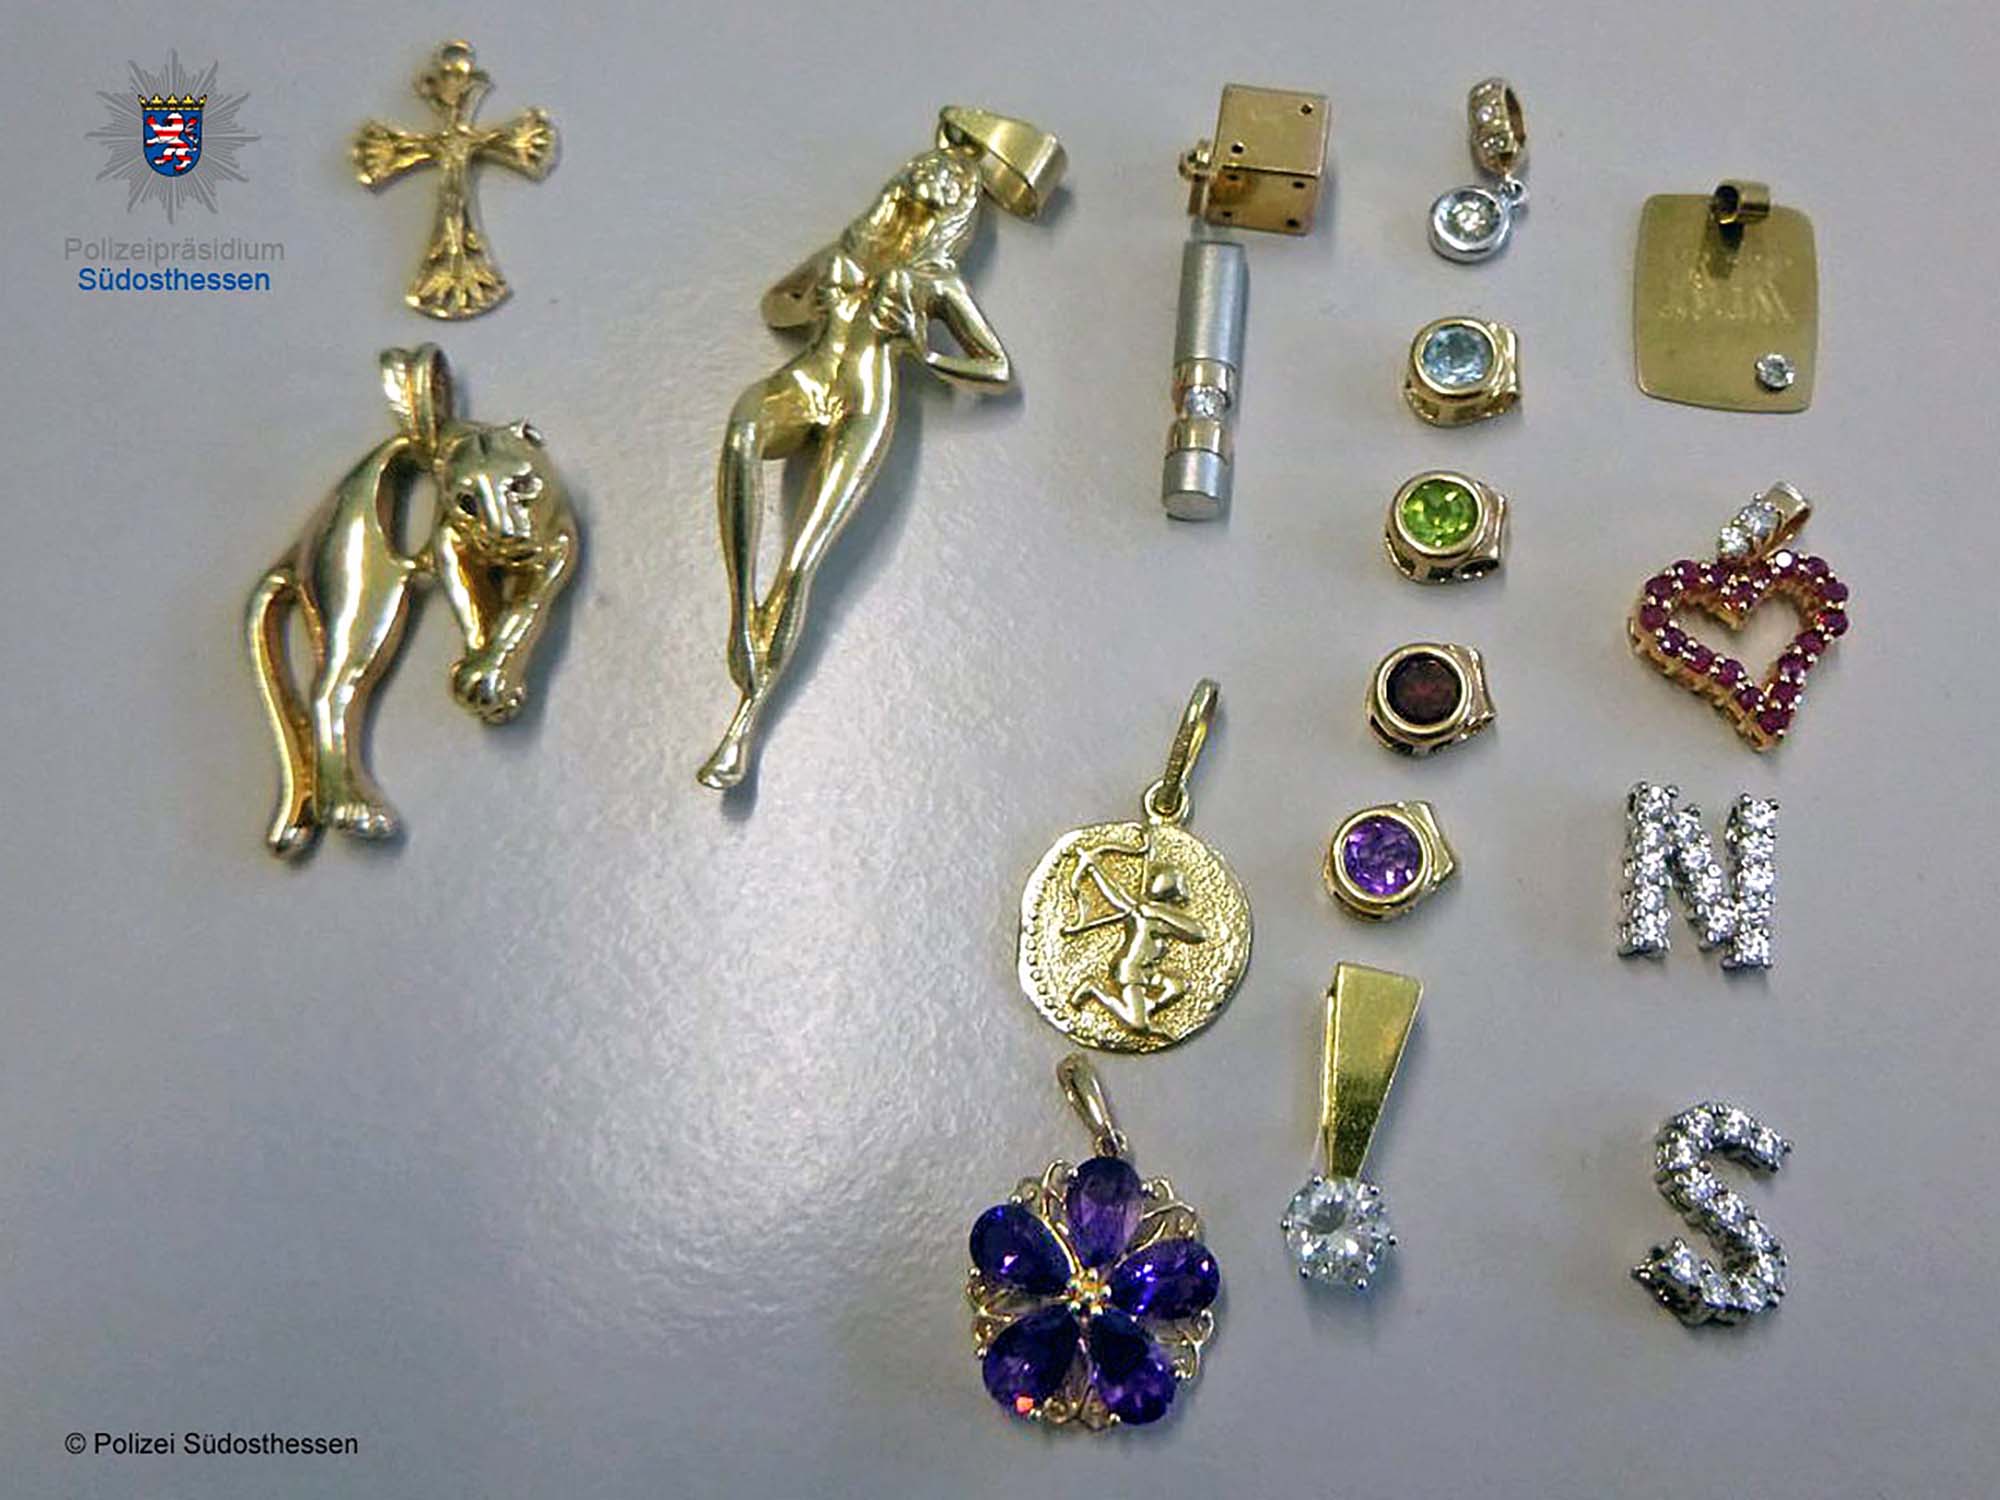 Man Finds Nearly $120,000 in Jewelry, Cash While Gardening, Gets to Keep It